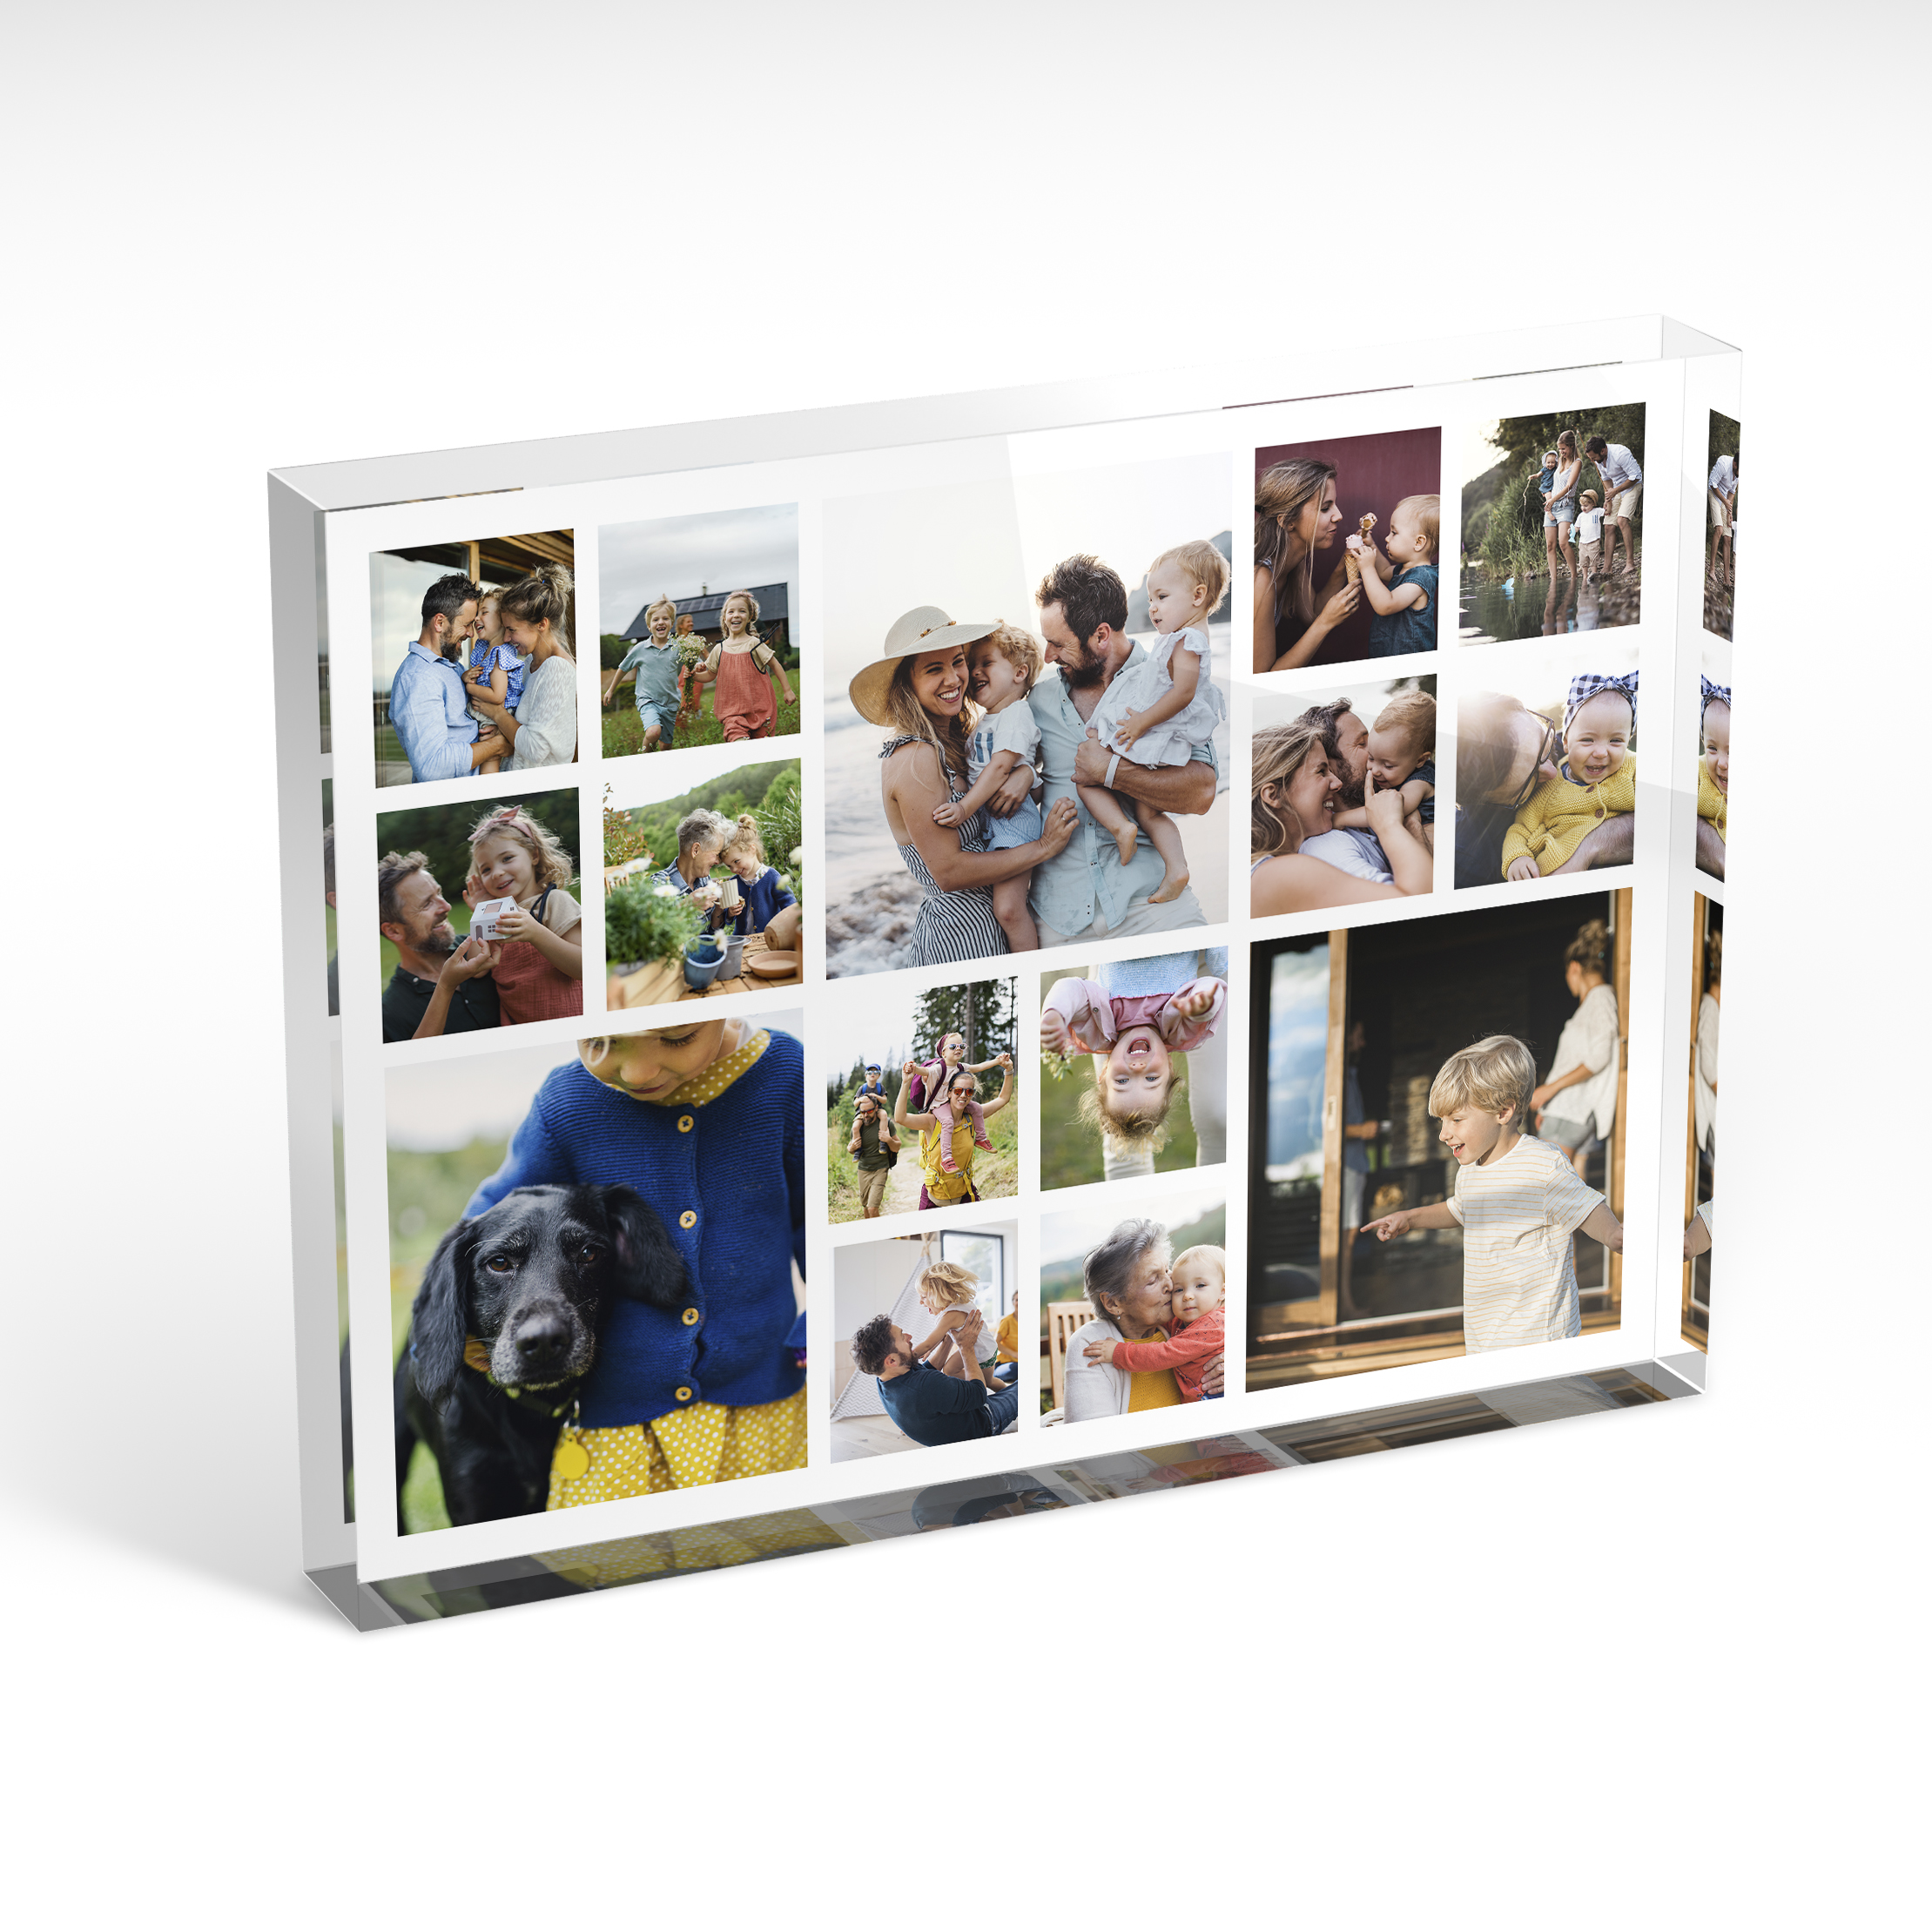 An angled side view of a landscape layout Acrylic Photo Block with space for 10+ photos. Thiis design is named "Memories Overload". 